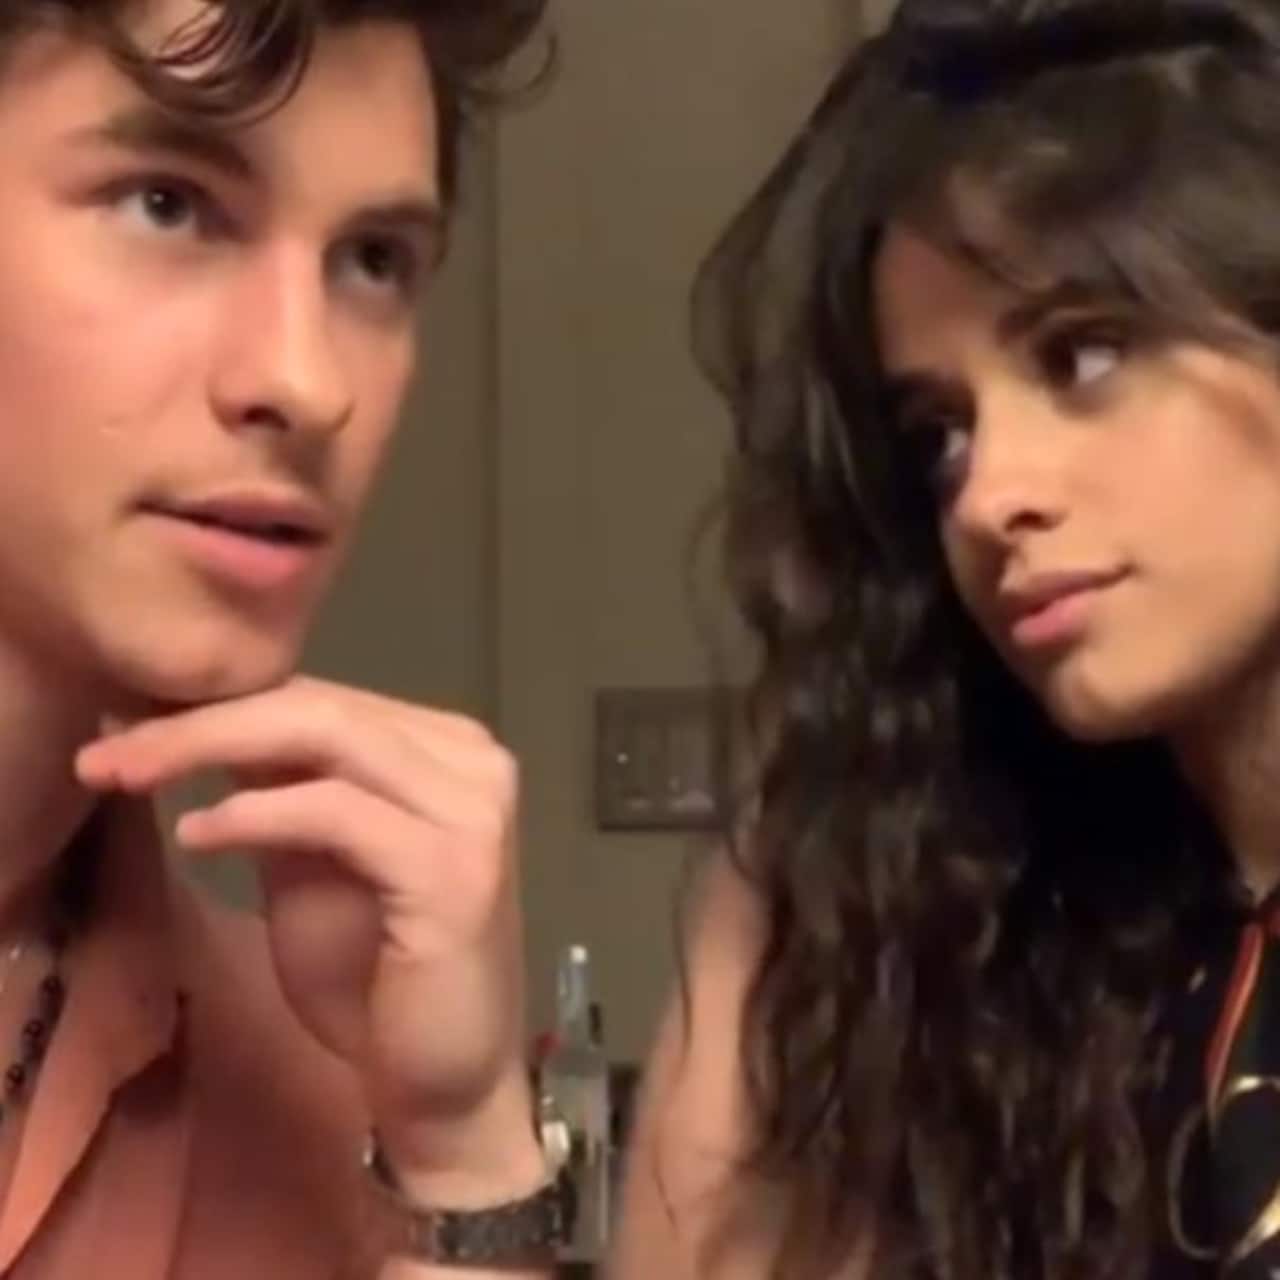 Shawn Mendes and Camila Cabello show fans how they 'KISS' through an Instagram video!